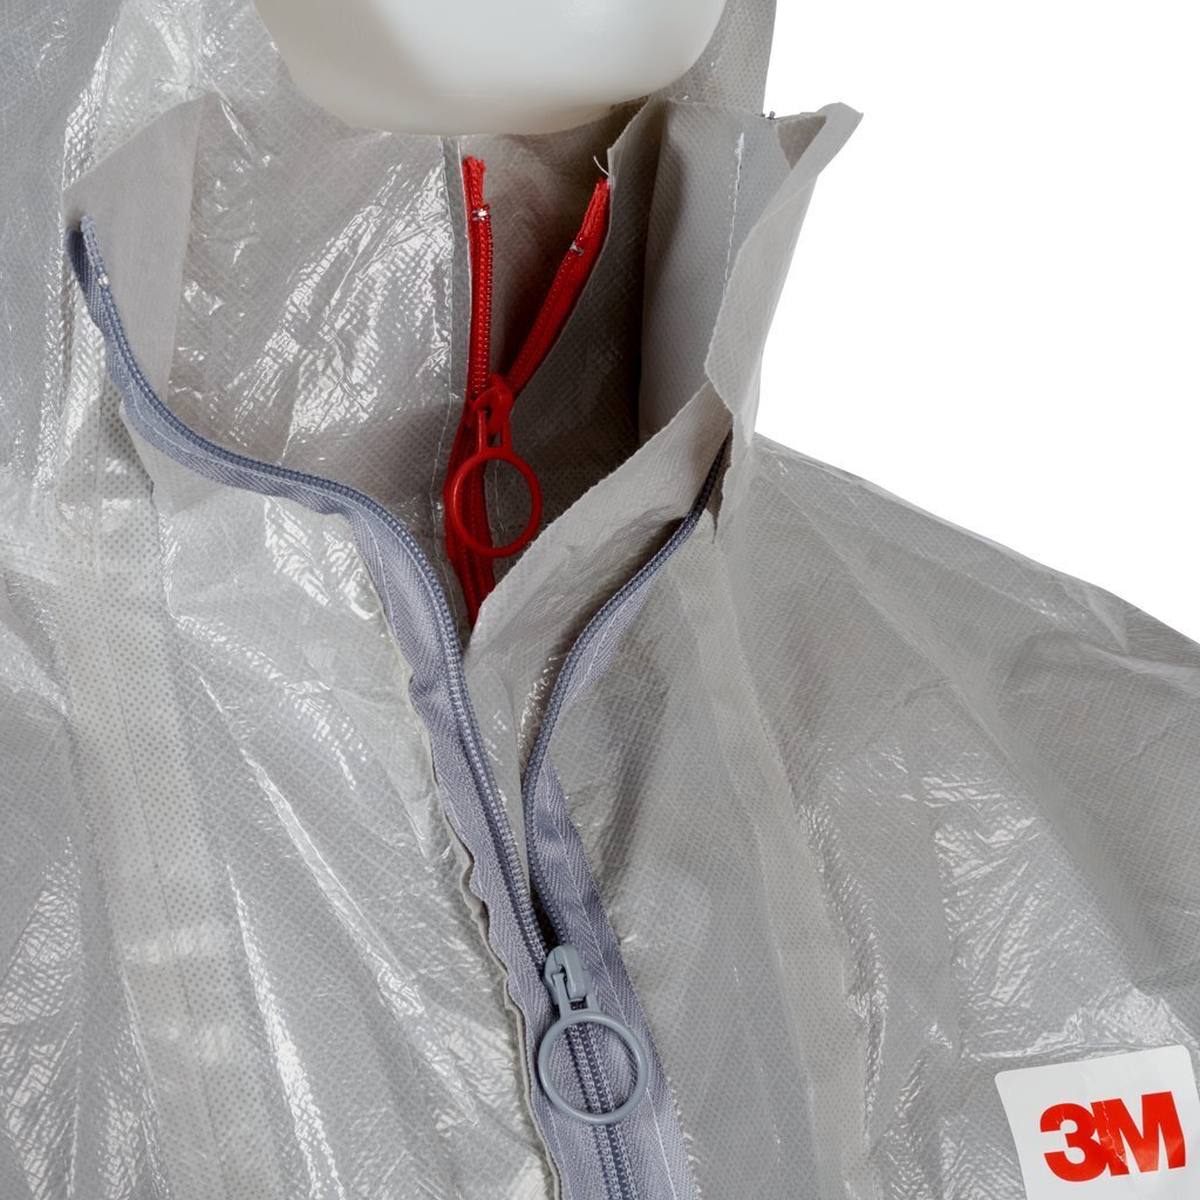 3M 4570 coverall, gray, type 3/4/5/6, size 2XL, extremely robust, sealed seams, double zipper, light and supple material, size 2XL